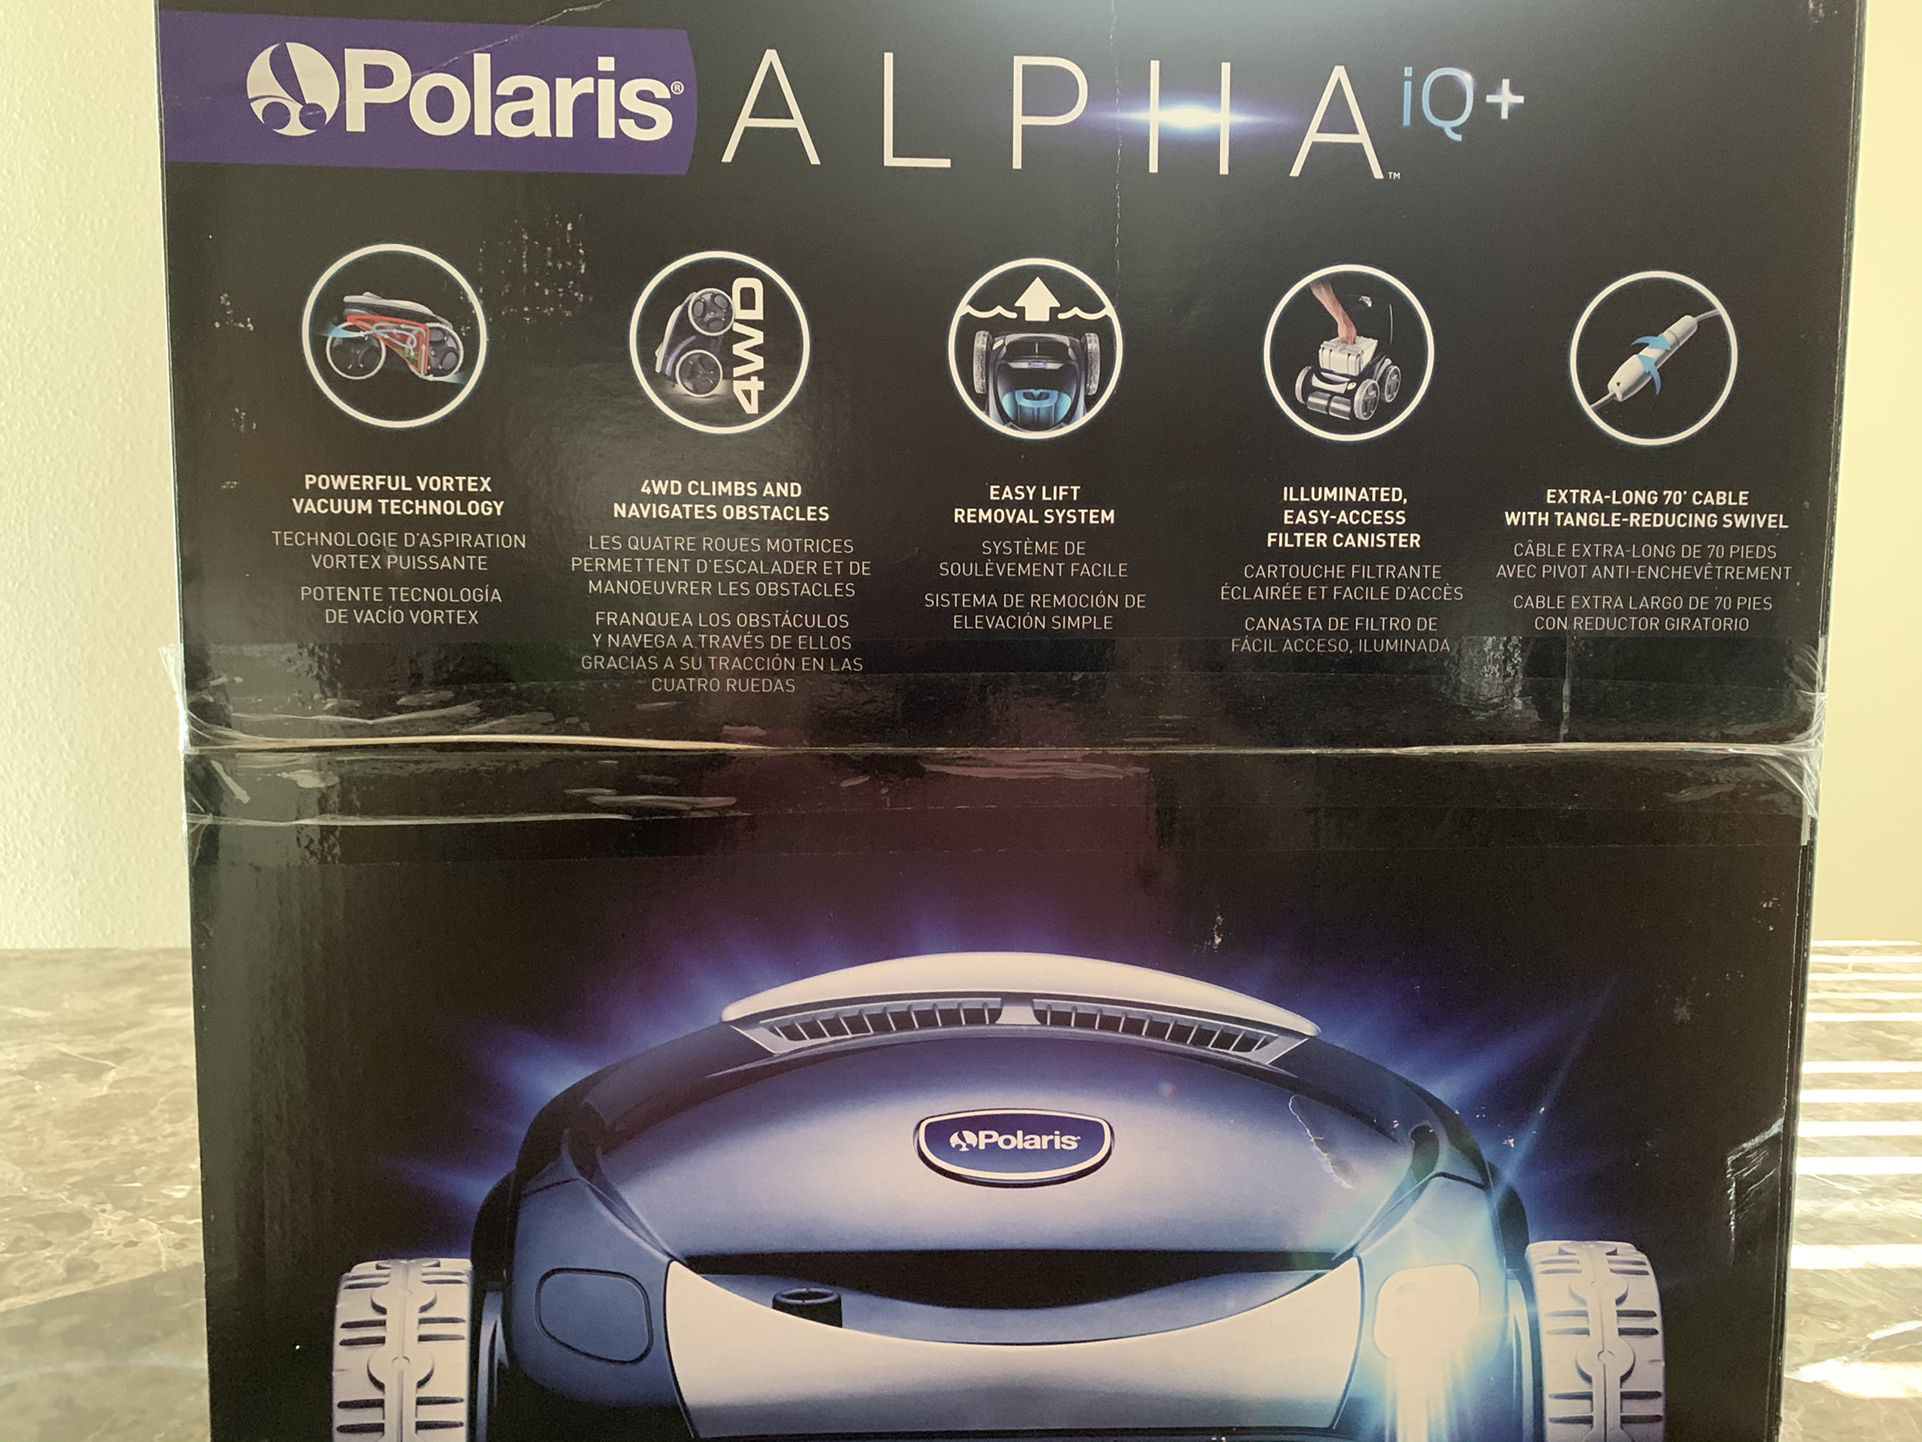 brand-new-never-used-polaris-alpha-iq-robotic-pool-cleaner-for-sale-in